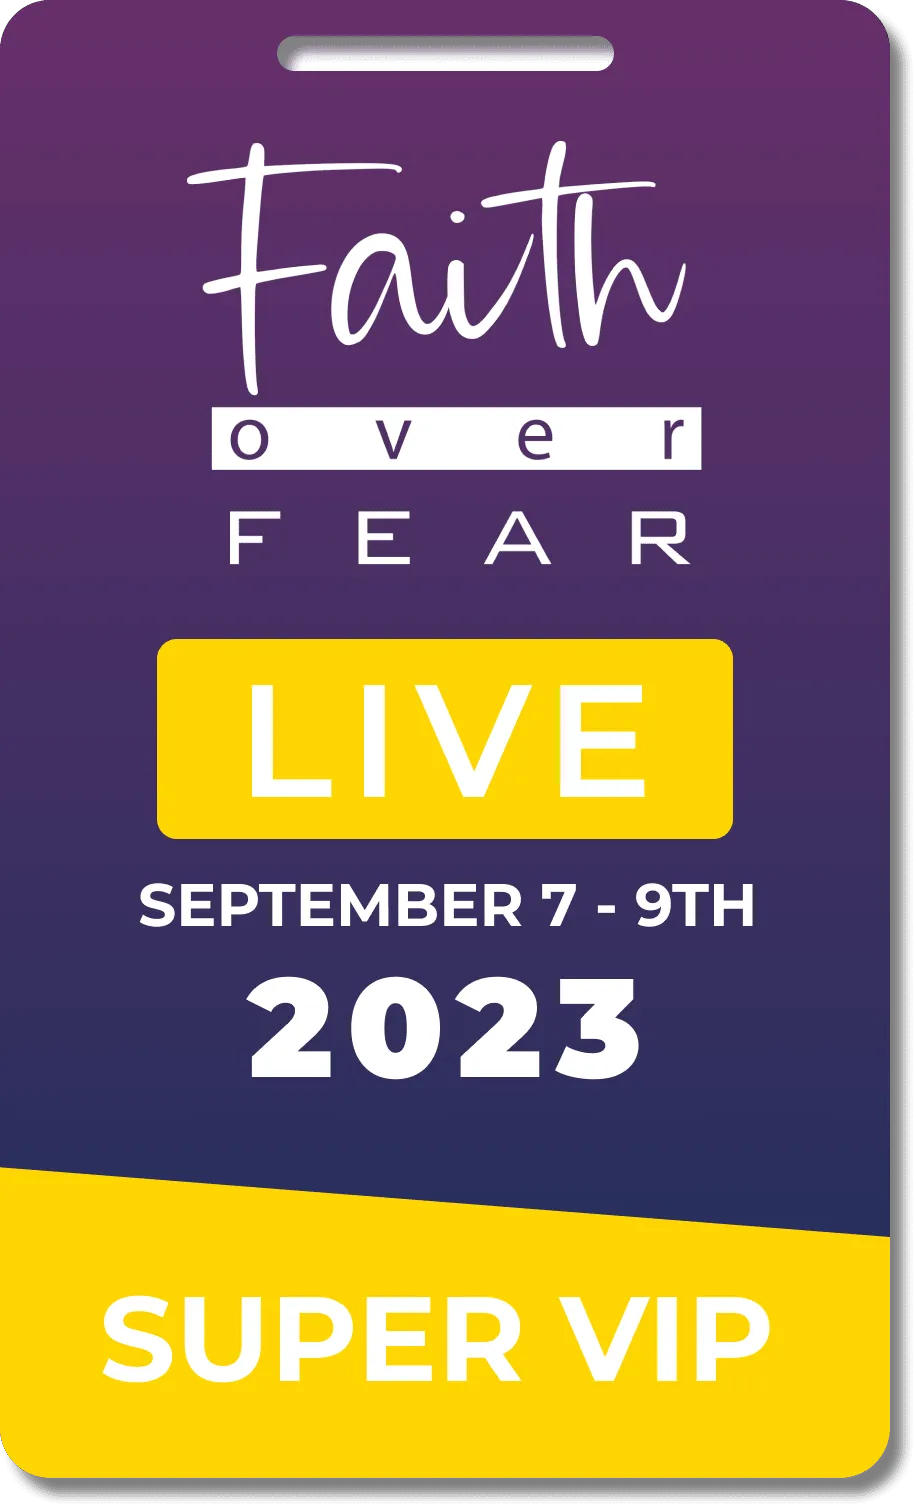 Compare faith over fear Prices 12/2023. Lowest Price 10.69